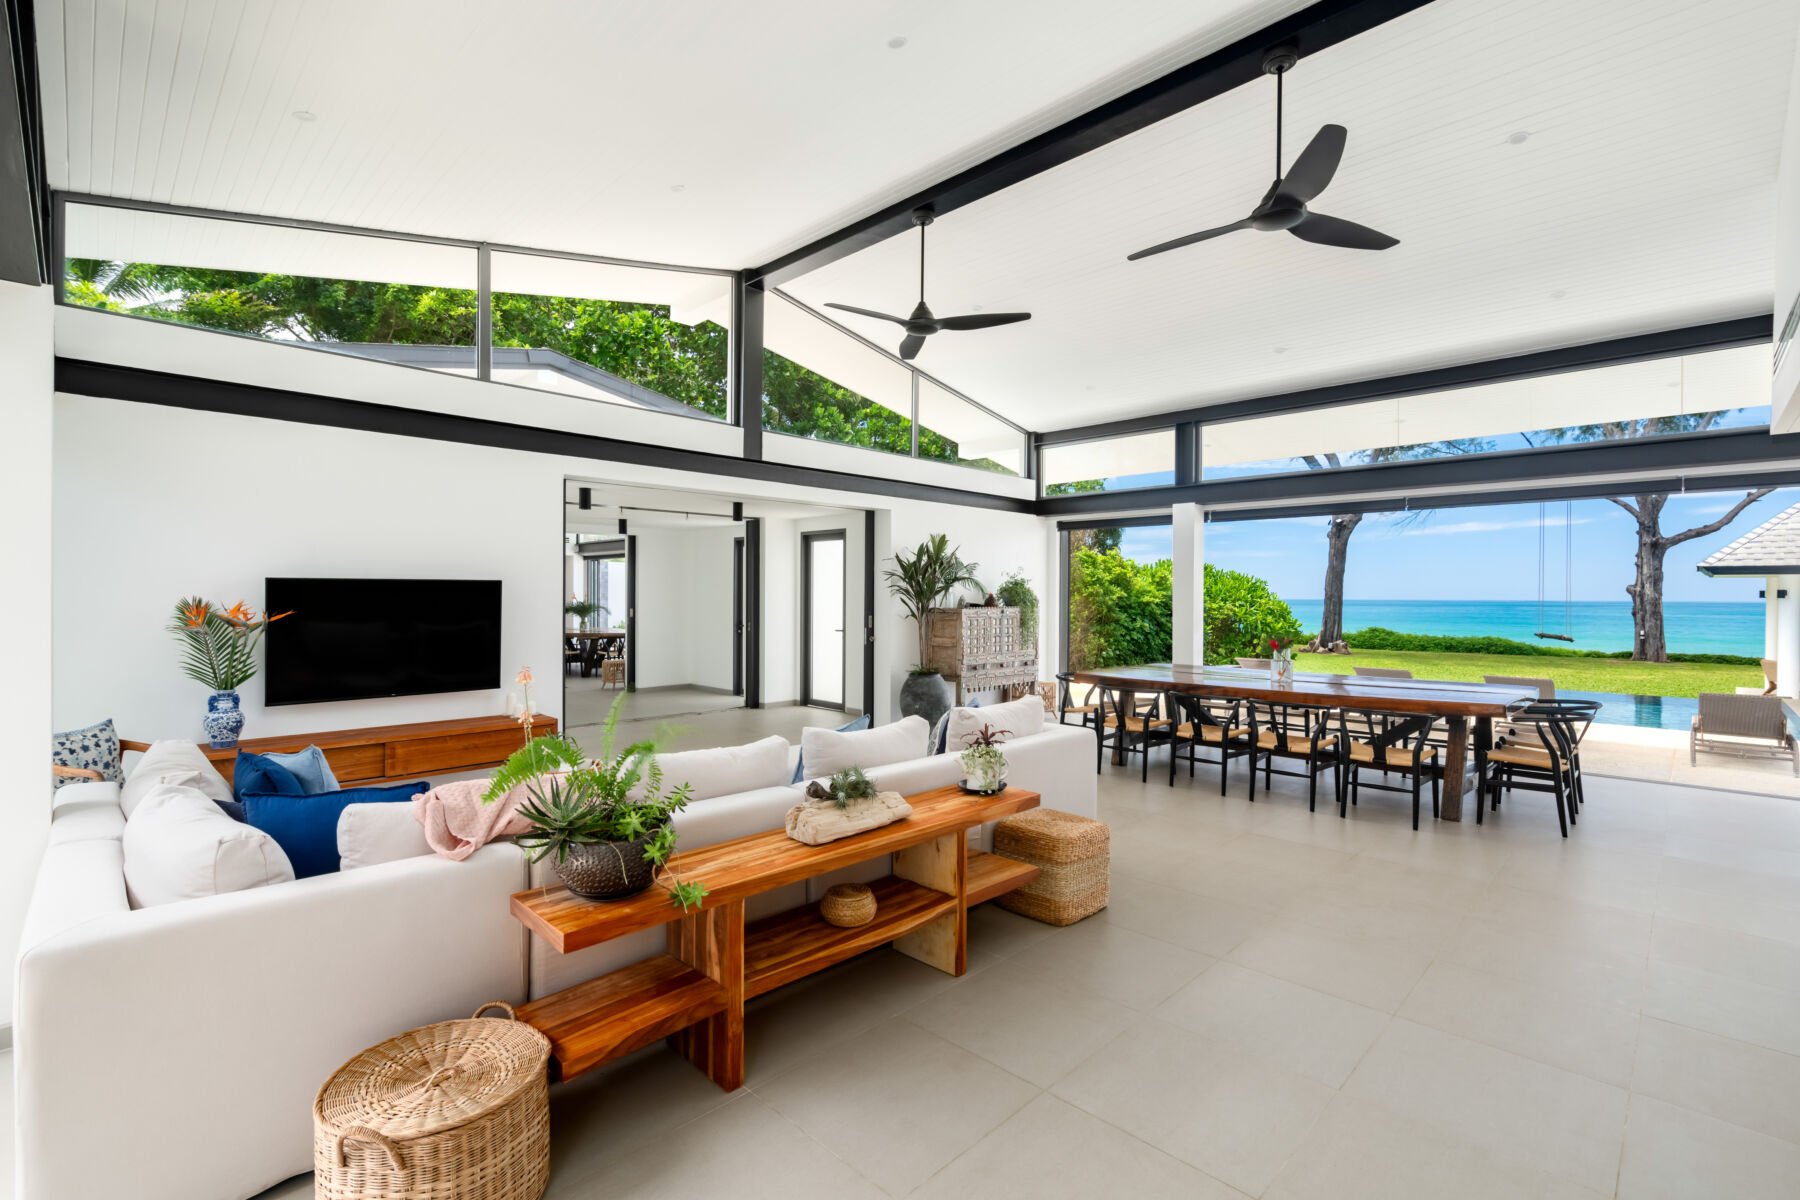 Top 5 luxury villas in Phuket and Koh Samui for your next holiday | News by Thaiger